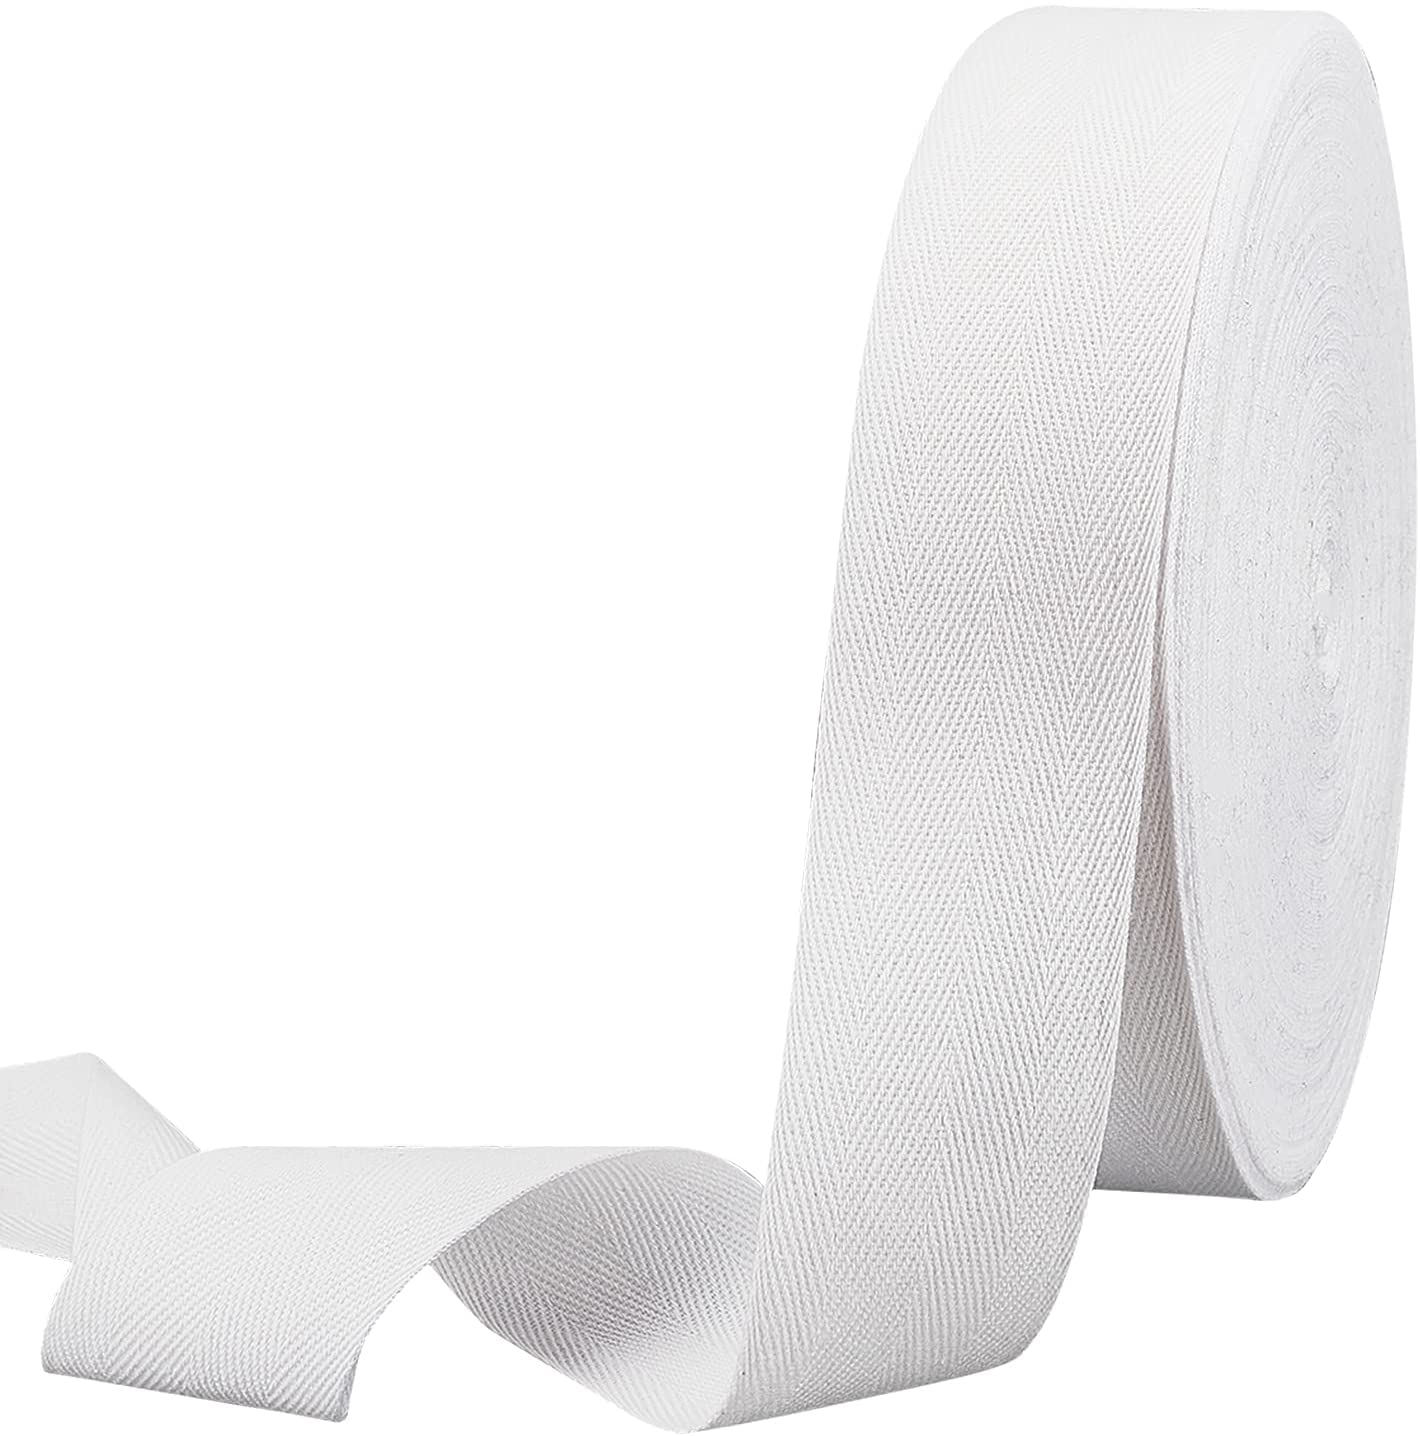 49 Yards(45m)/Roll Cotton Tape Ribbons, Herringbone Cotton Webbings, 50mm Wide Flat Cotton Herringbone Cords for Home Decor, Wrapping Gifts, Sewing DIY Crafts, White